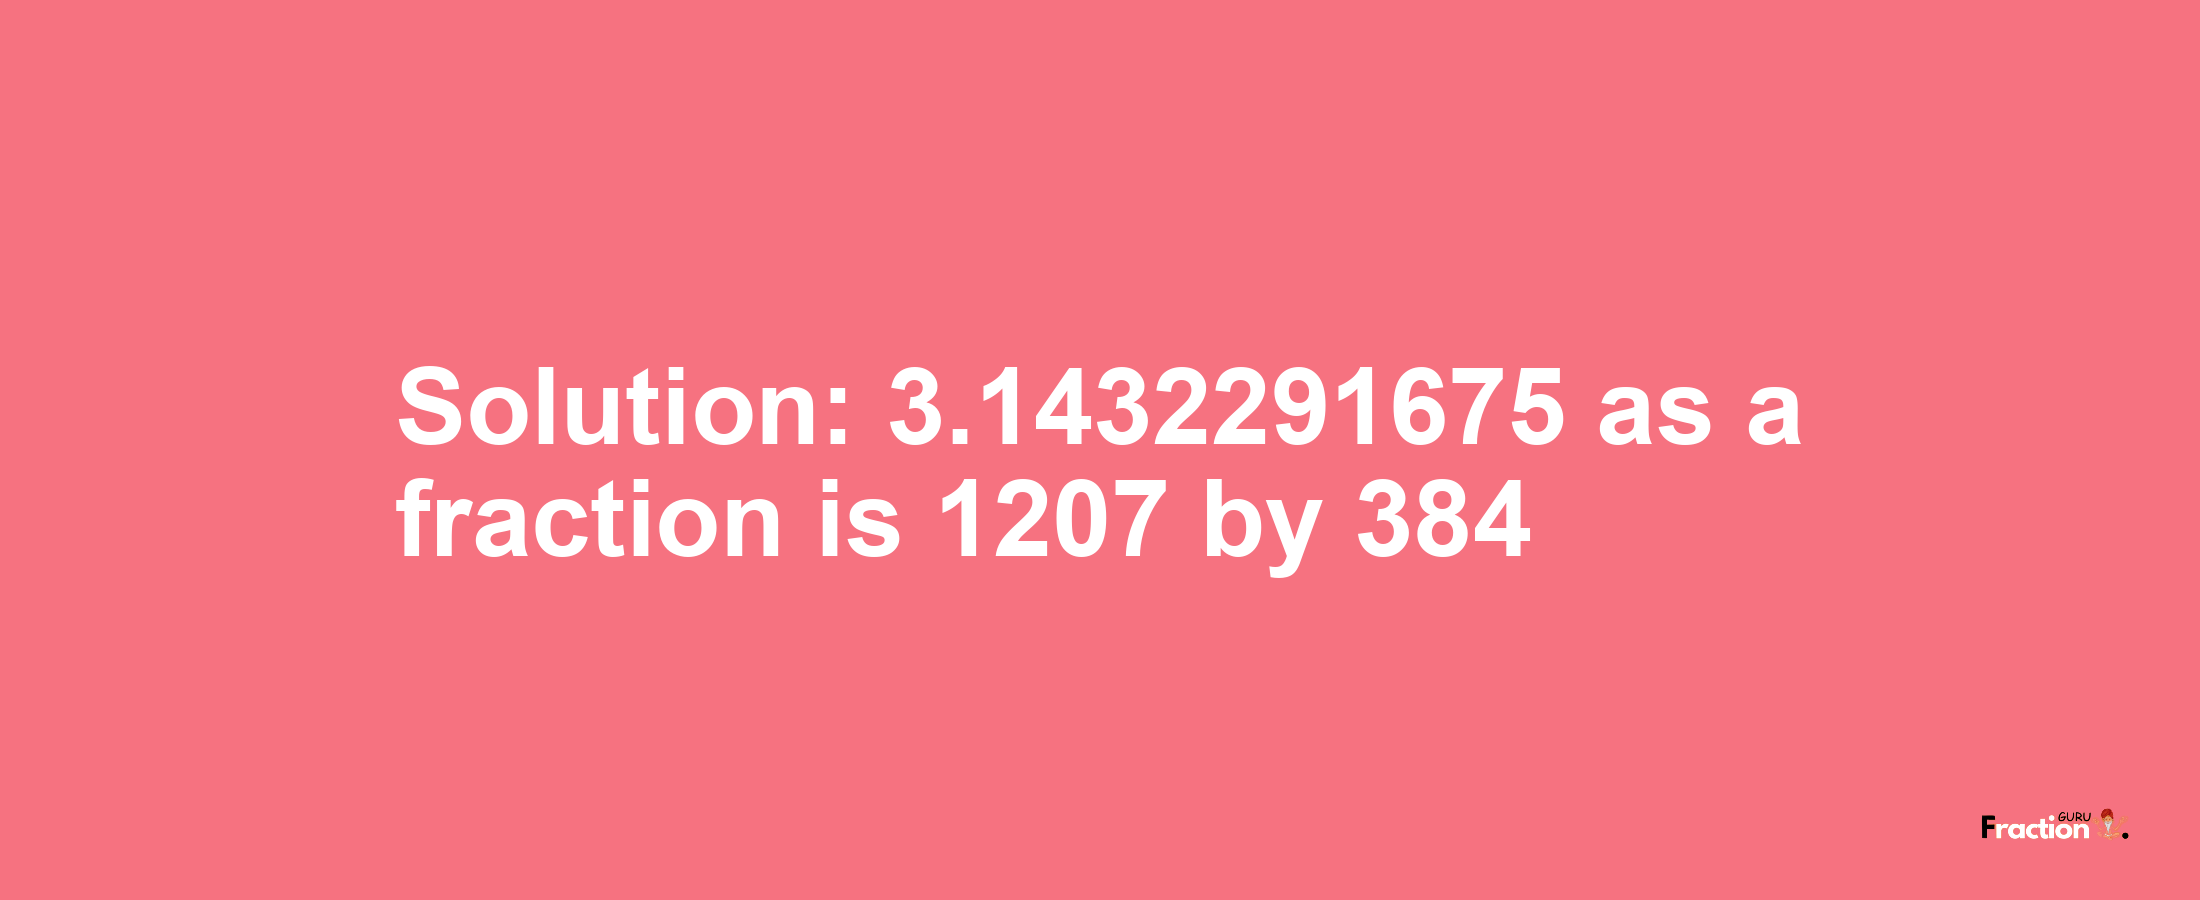 Solution:3.1432291675 as a fraction is 1207/384